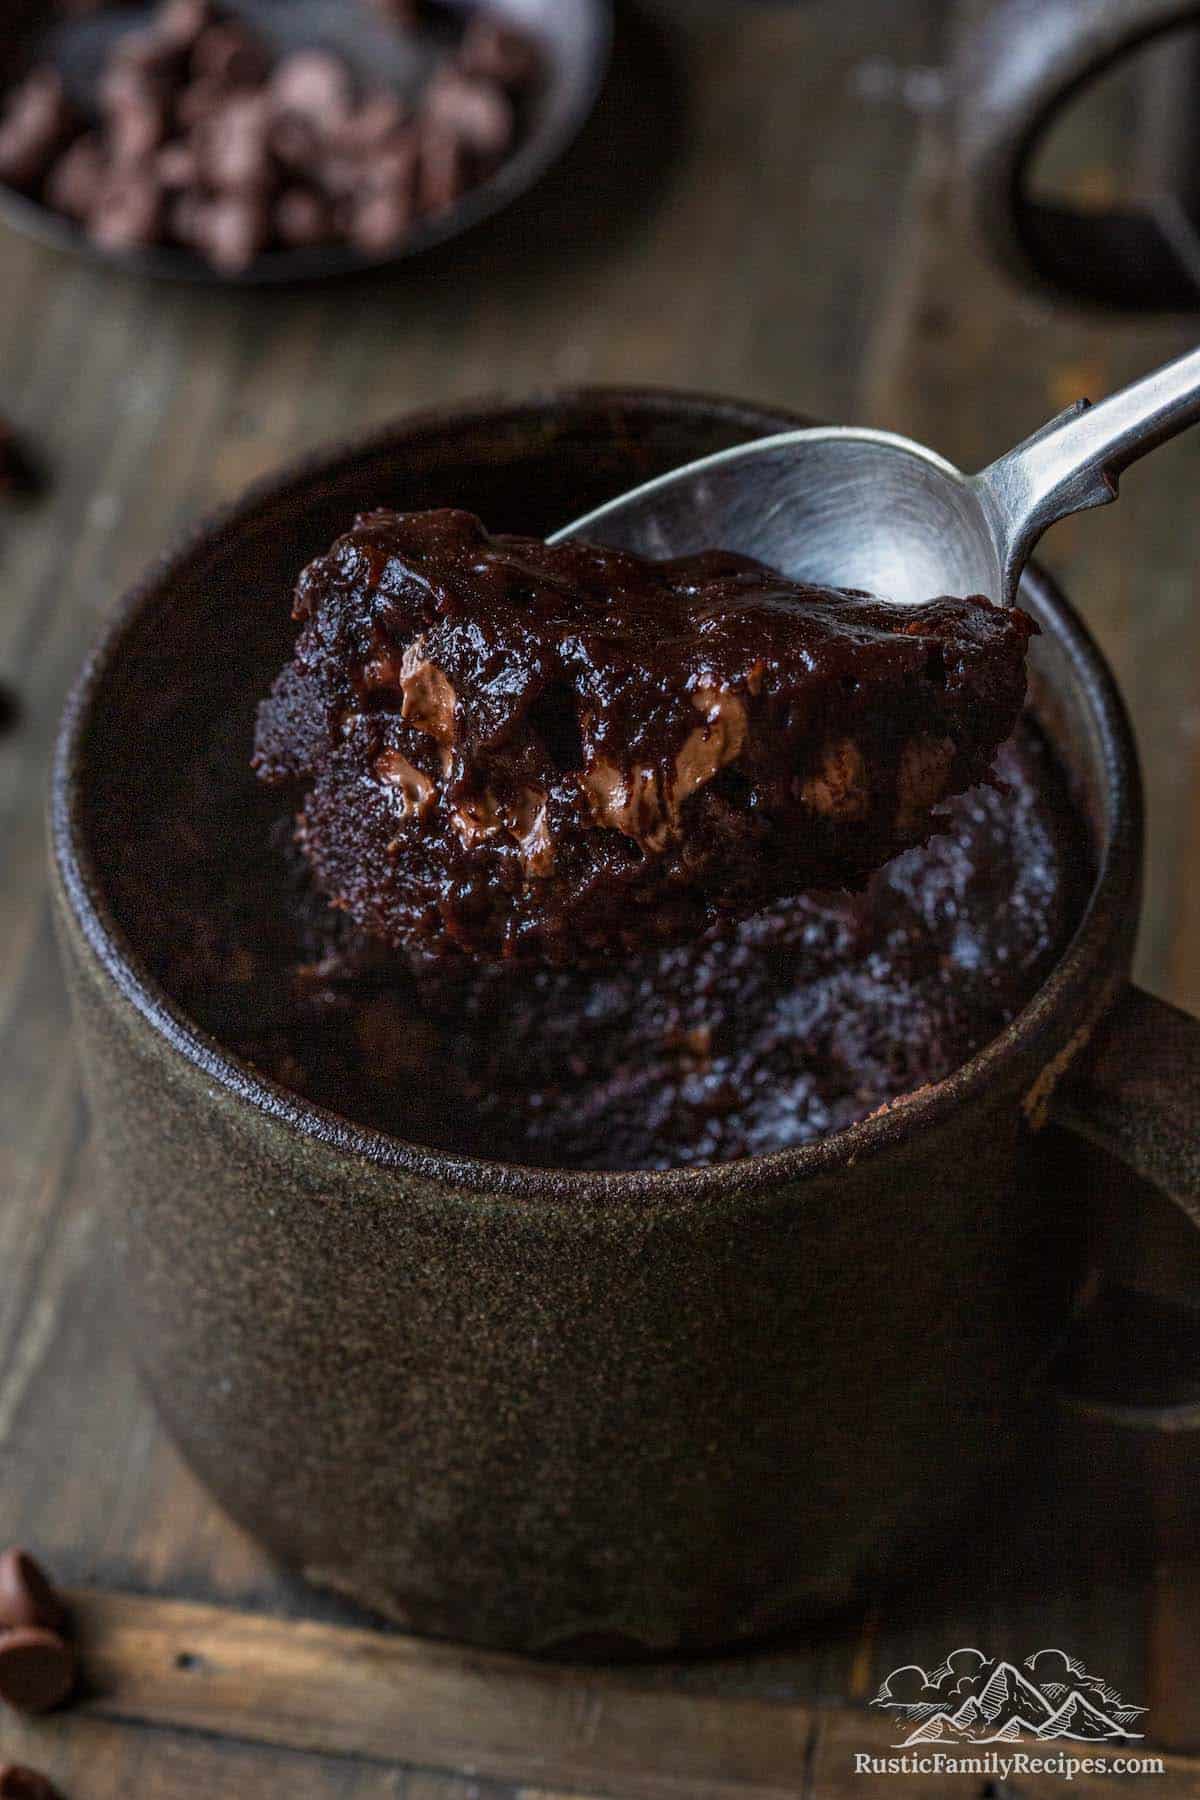 A spoon with a scoop of brownie in front of a mug